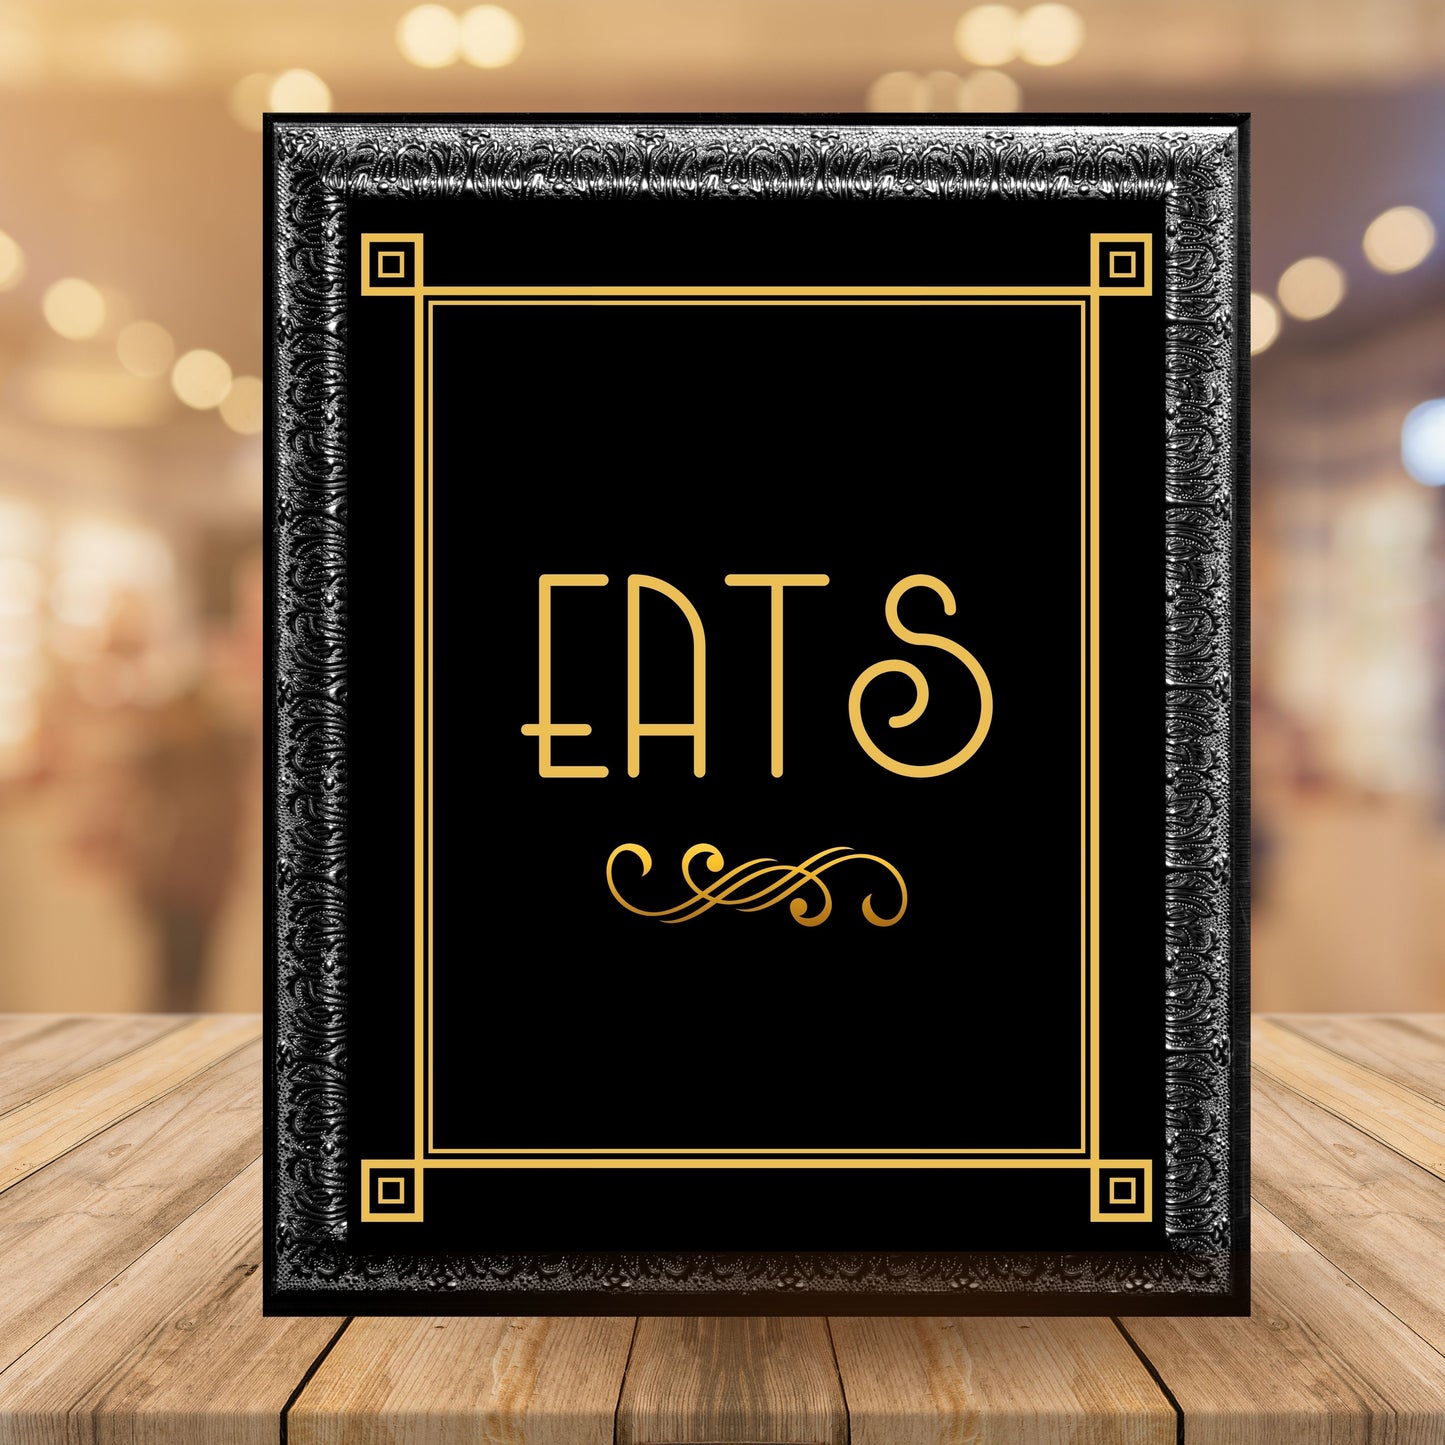 "Eats" Printable Party Sign For Great Gatsby Or Roaring 20's Party Or Wedding, Black & Gold, Printable Party Decor